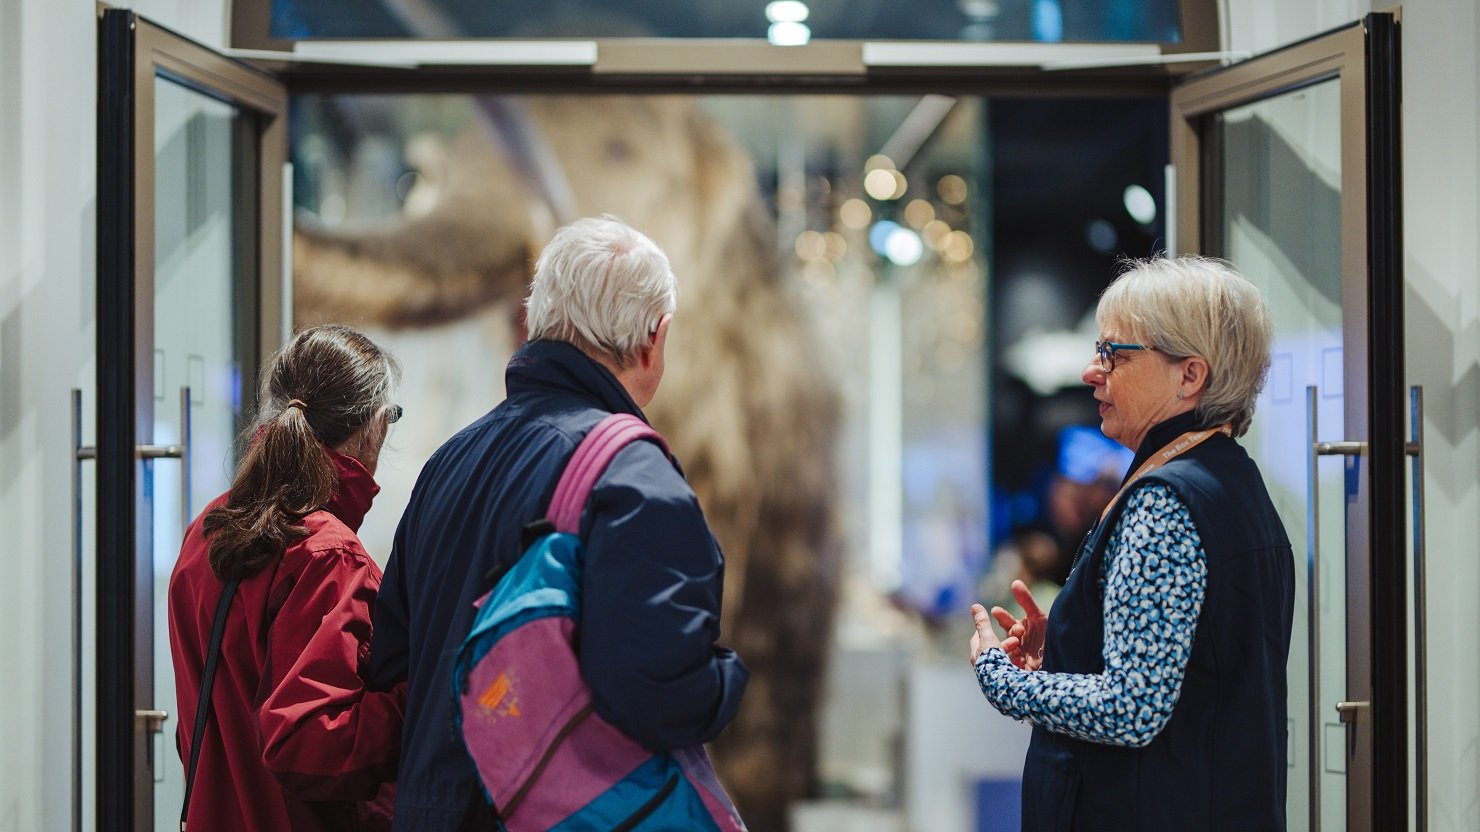 A female volunteer in an art gallery talking to two visitors